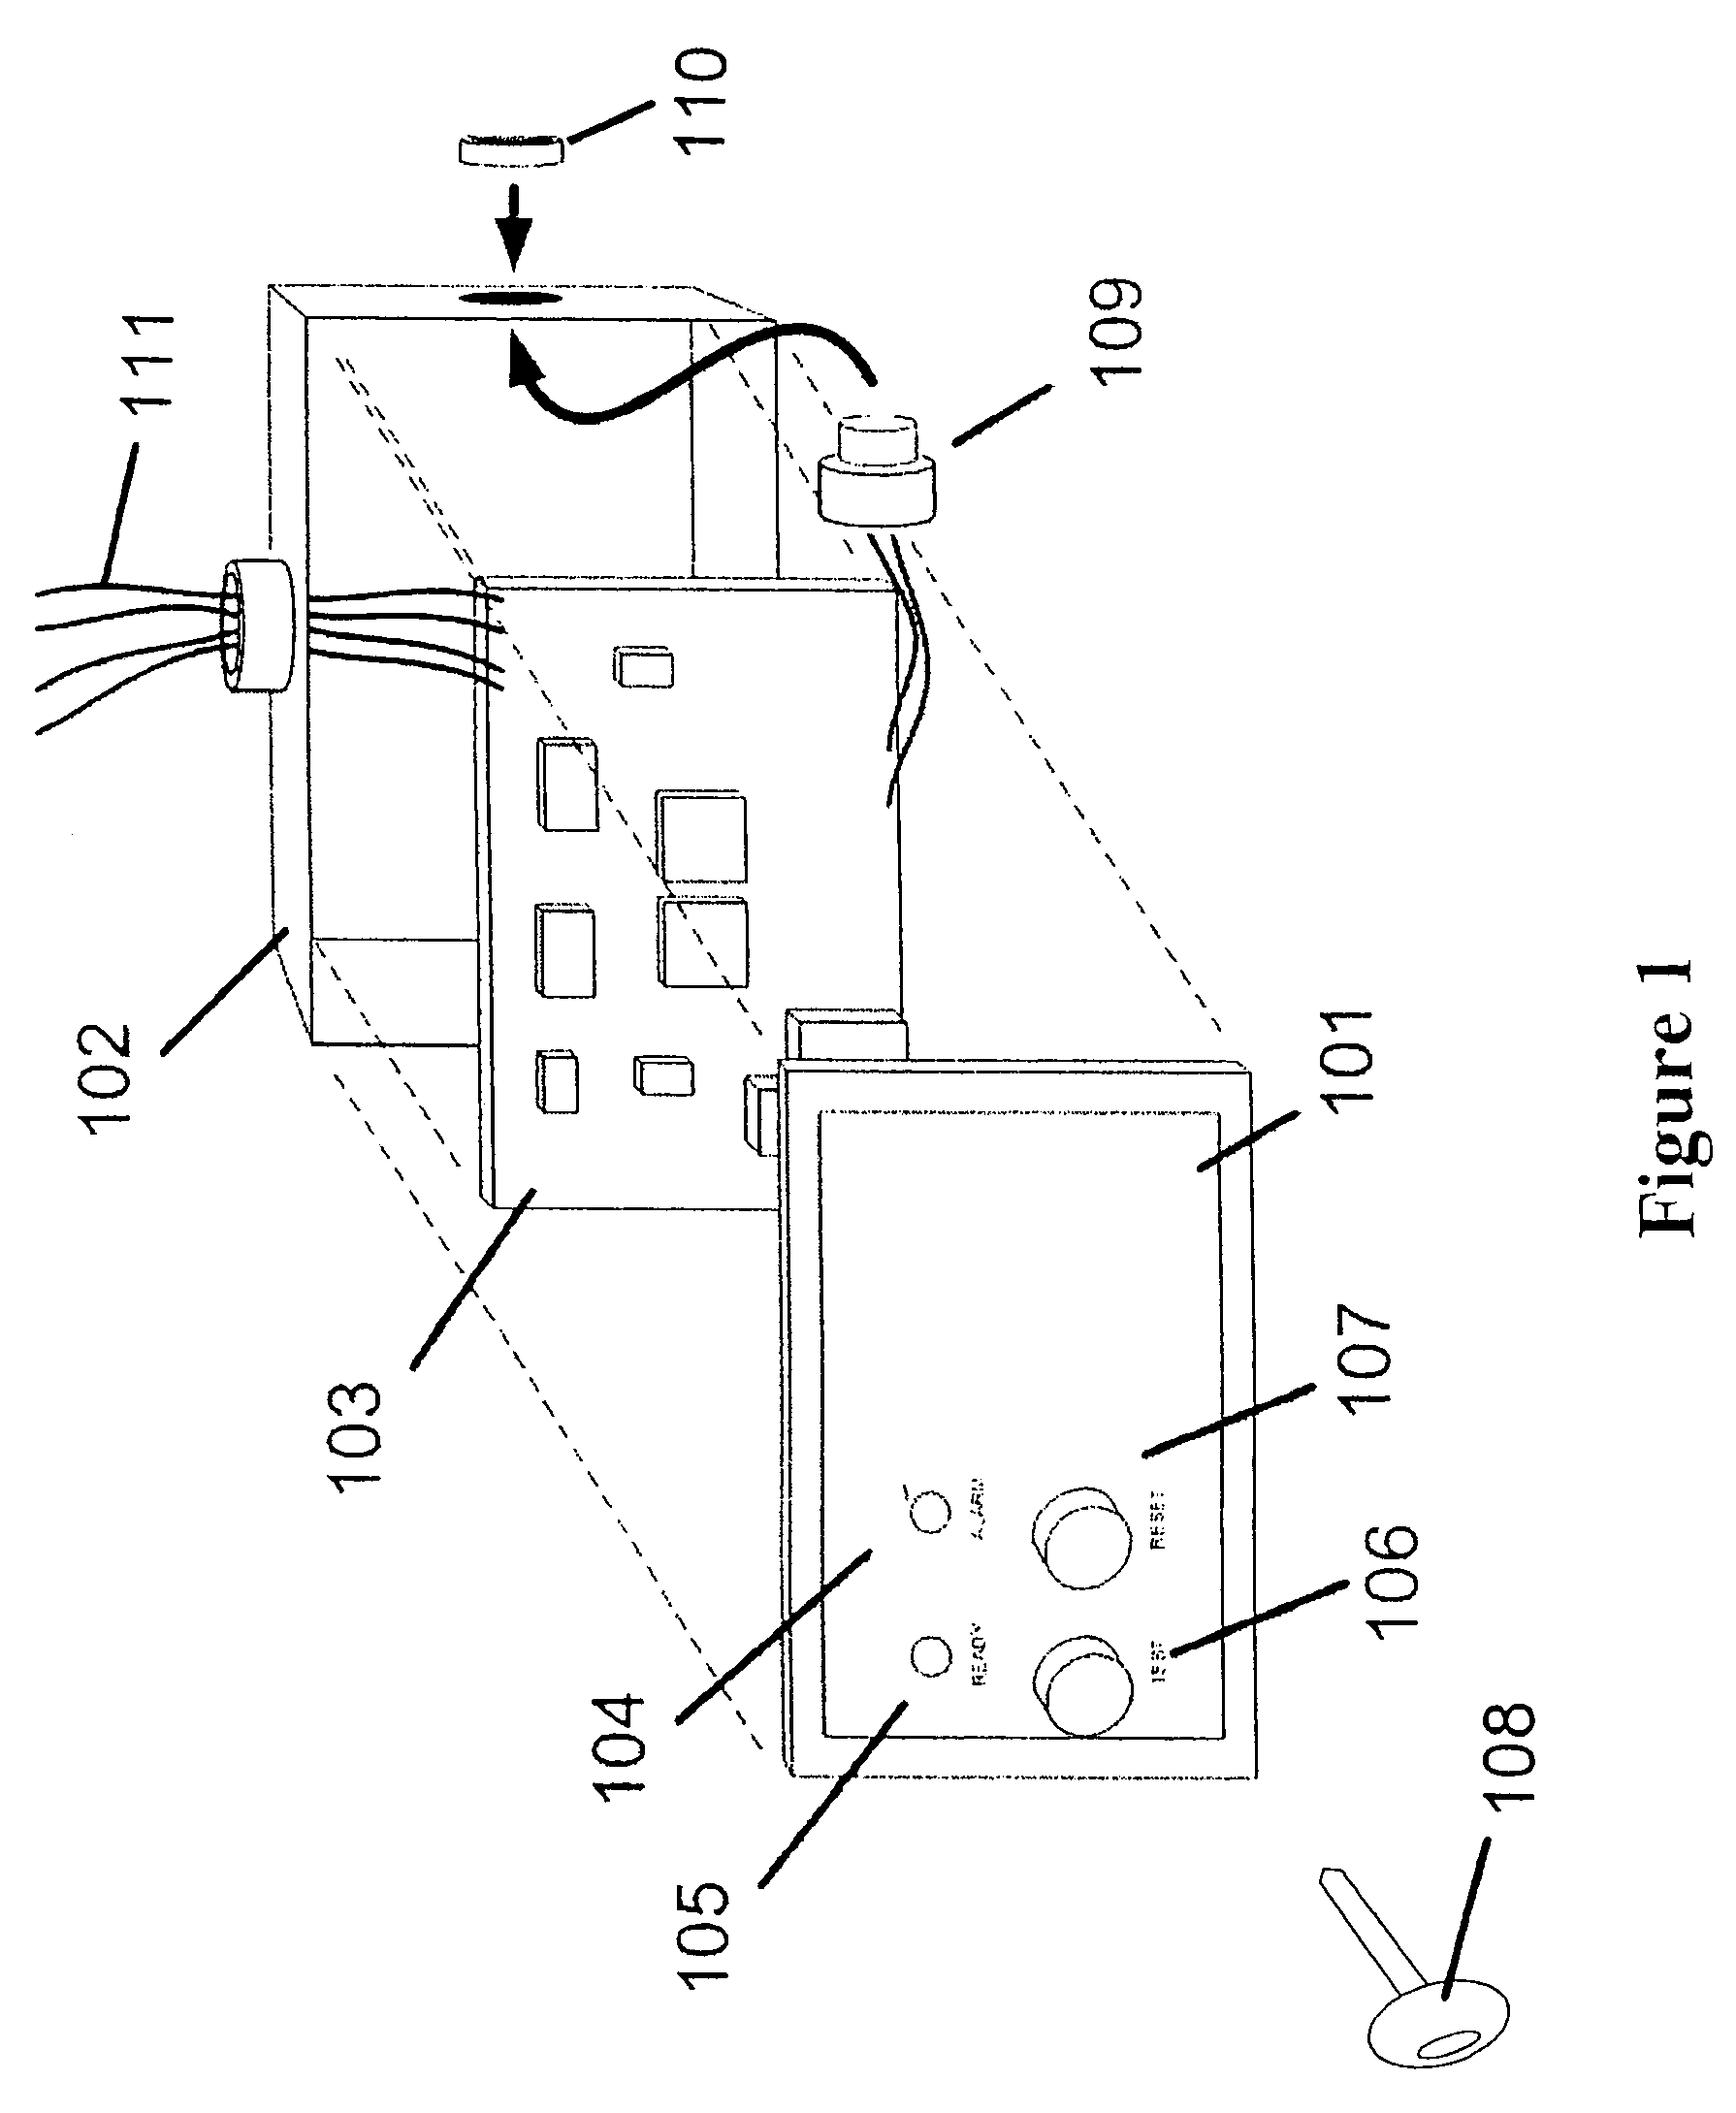 Seismic detection system and a method of operating the same